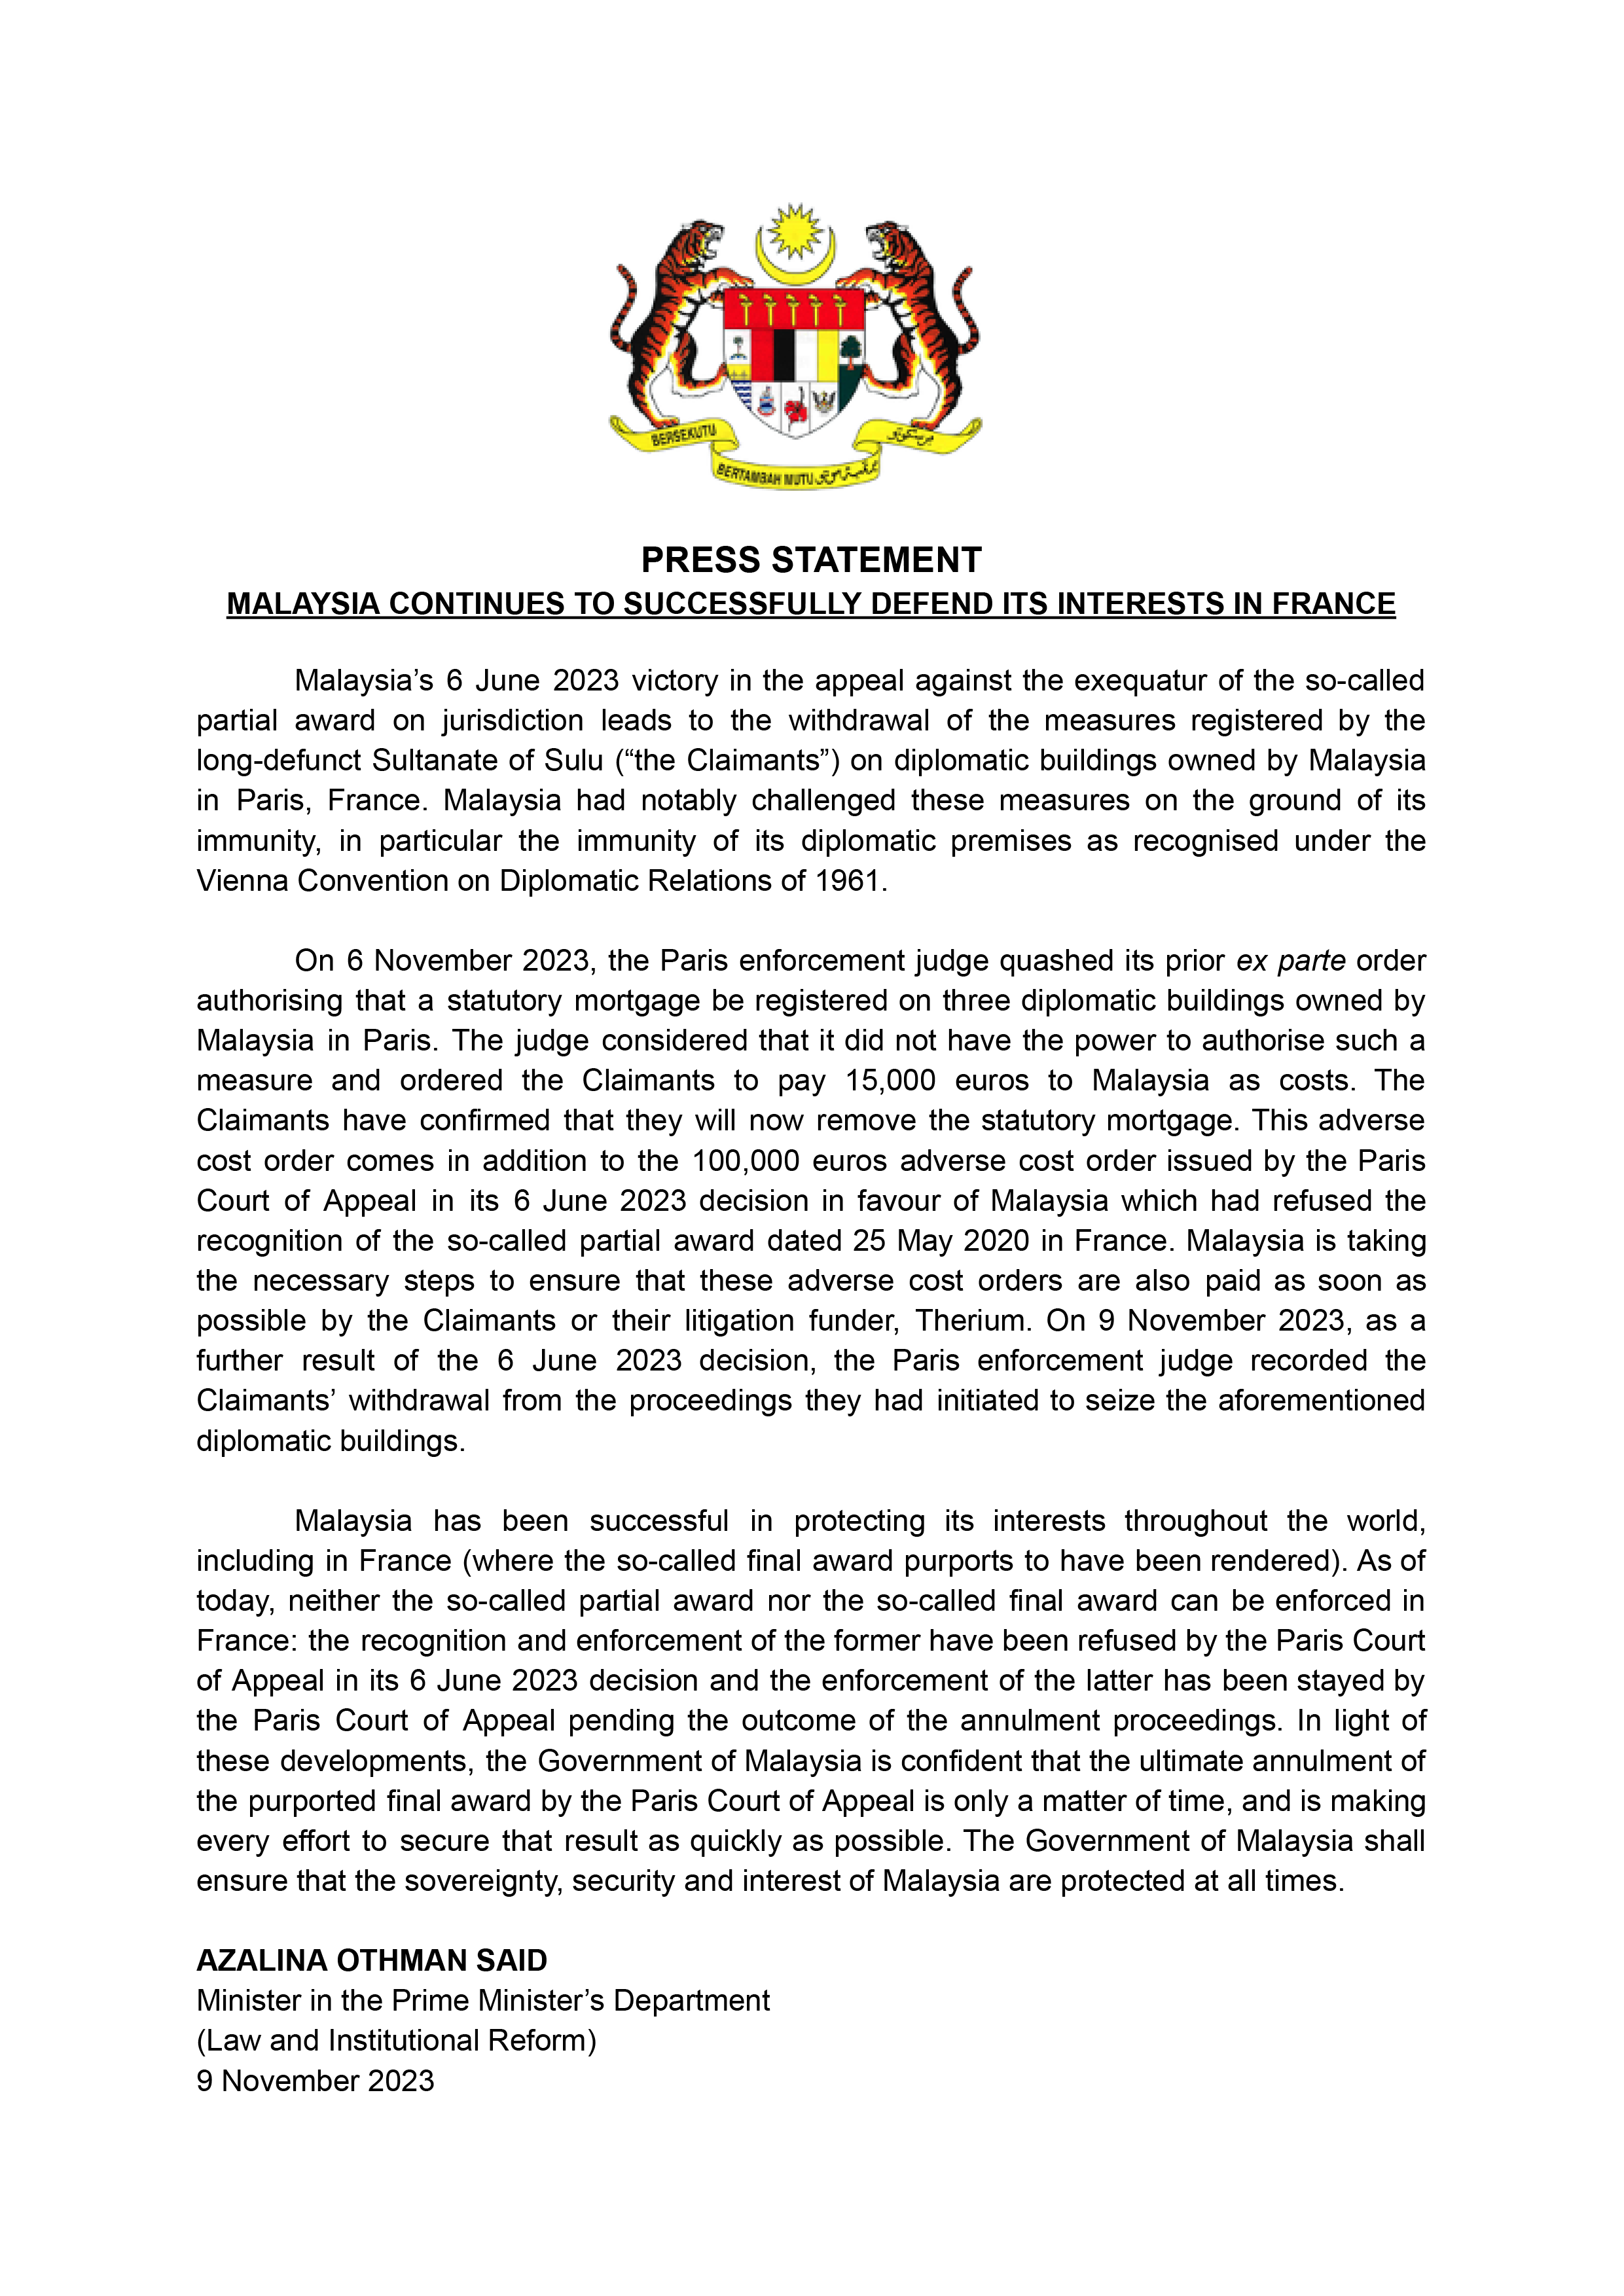 PRESS STATEMENT MALAYSIA CONTINUES TO SUCCESSFULLY DEFEND ITS INTERESTS IN FRANCE 9NOVEMBER2023